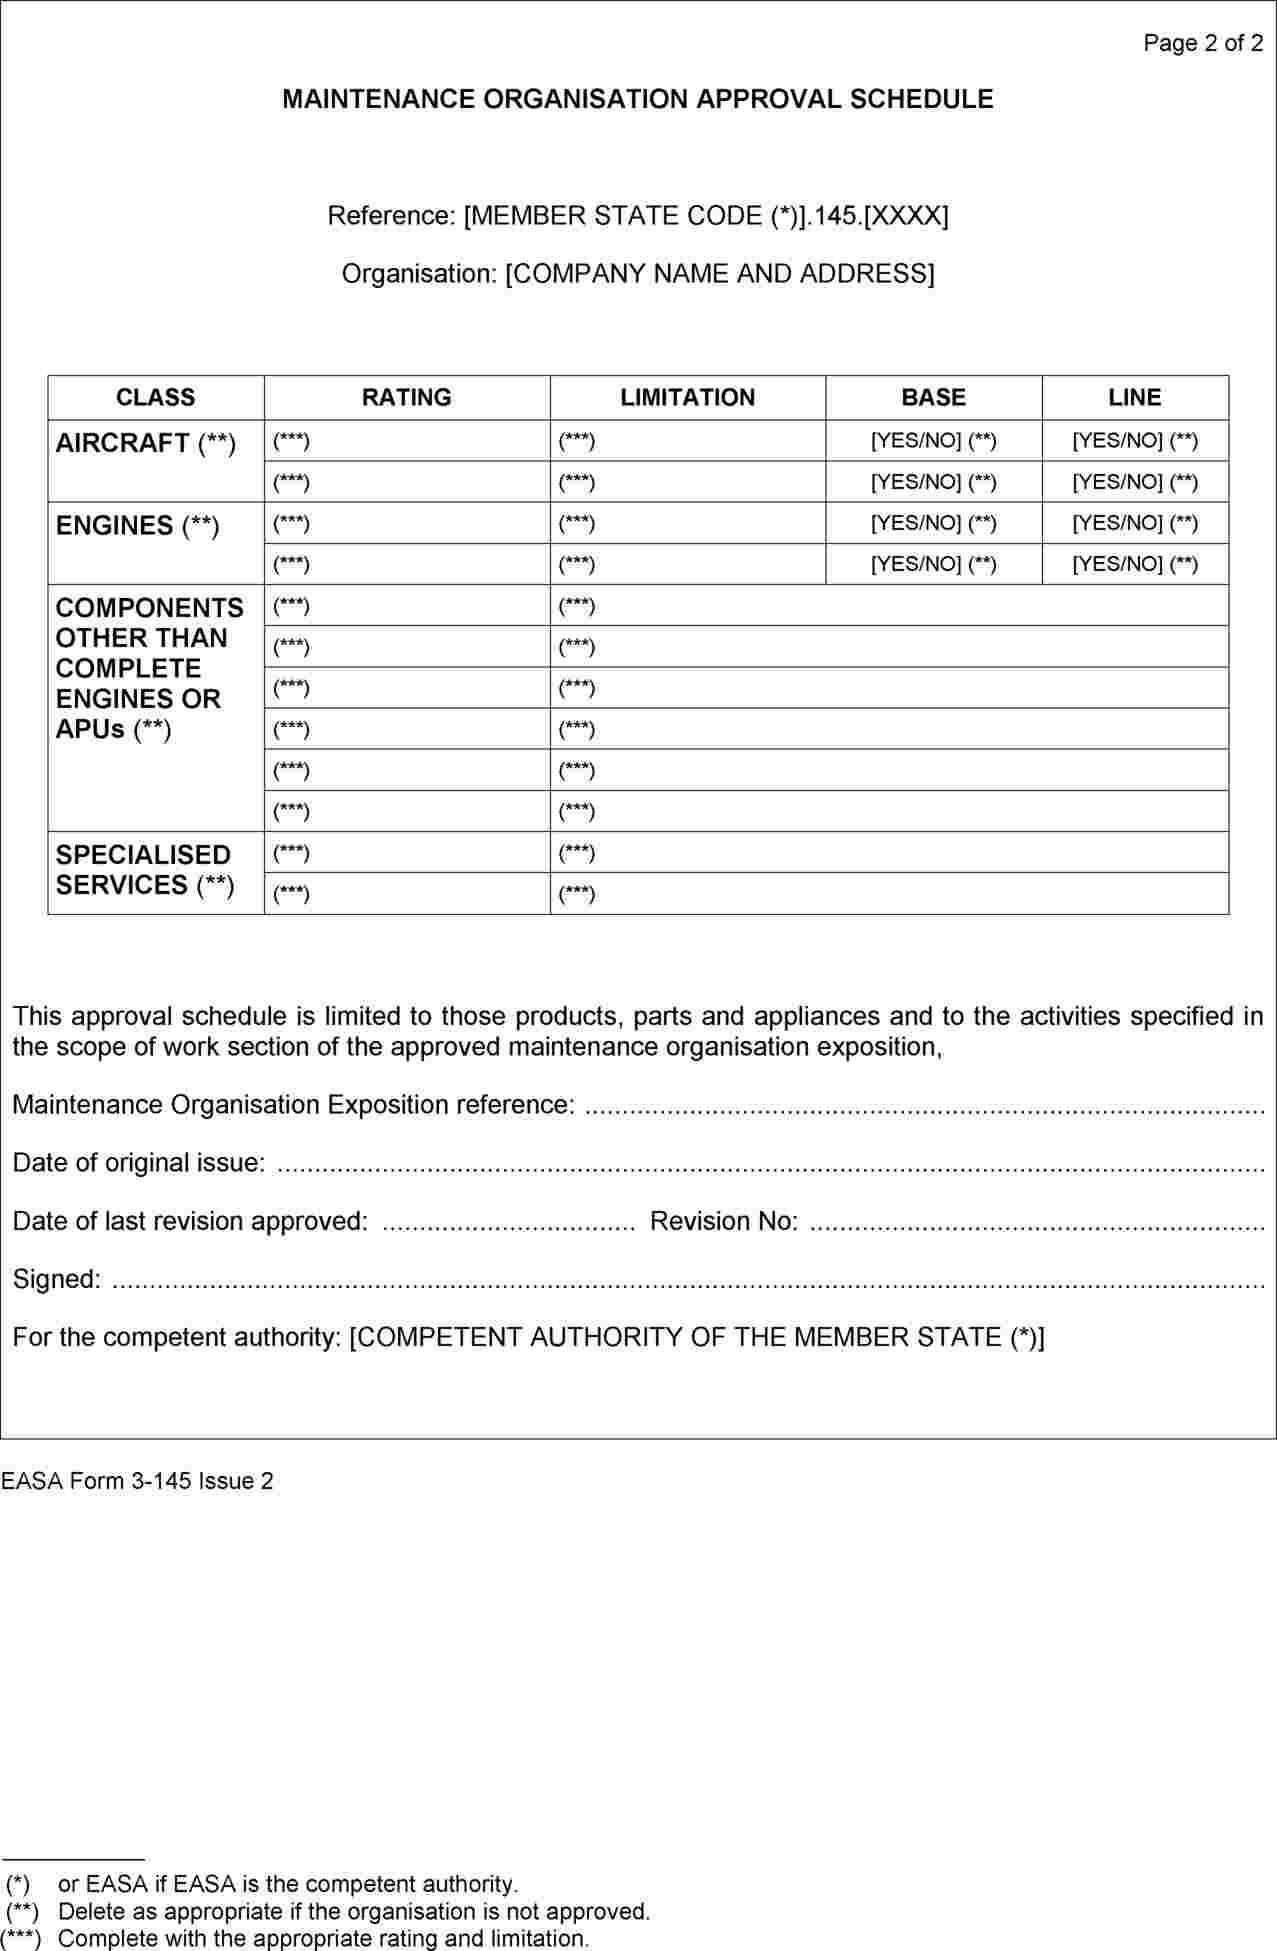 Ecological Footprint Calculator Worksheet the Backup Tape Rotation Spreadsheet Template is A Very